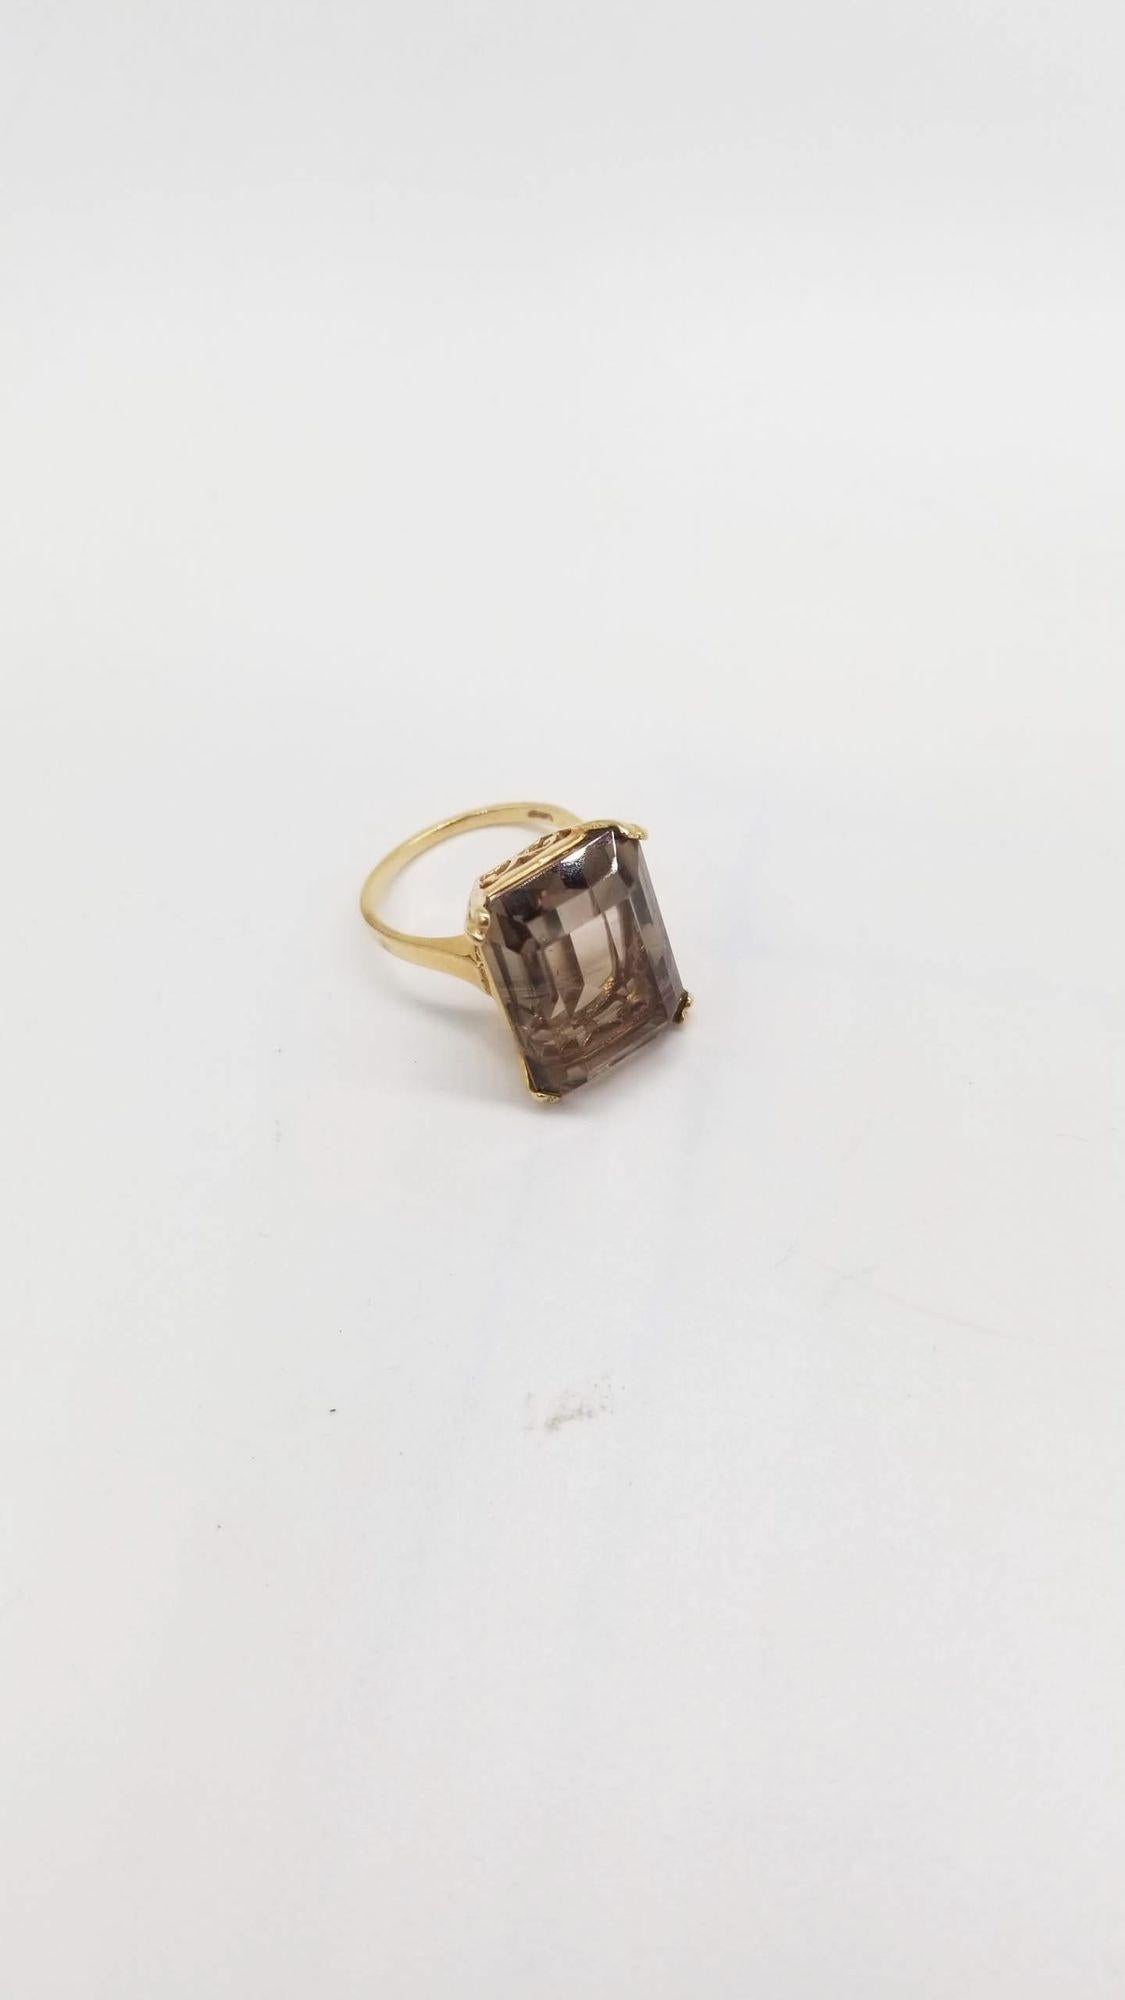 Transport yourself to an era of glamour with this Vintage 14K Yellow Gold Emerald-Cut Smoky Quartz Cocktail Ring. Delicately sized at 5, this exquisite piece showcases a mesmerizing emerald-cut smoky quartz gemstone set in warm, lustrous 14K yellow